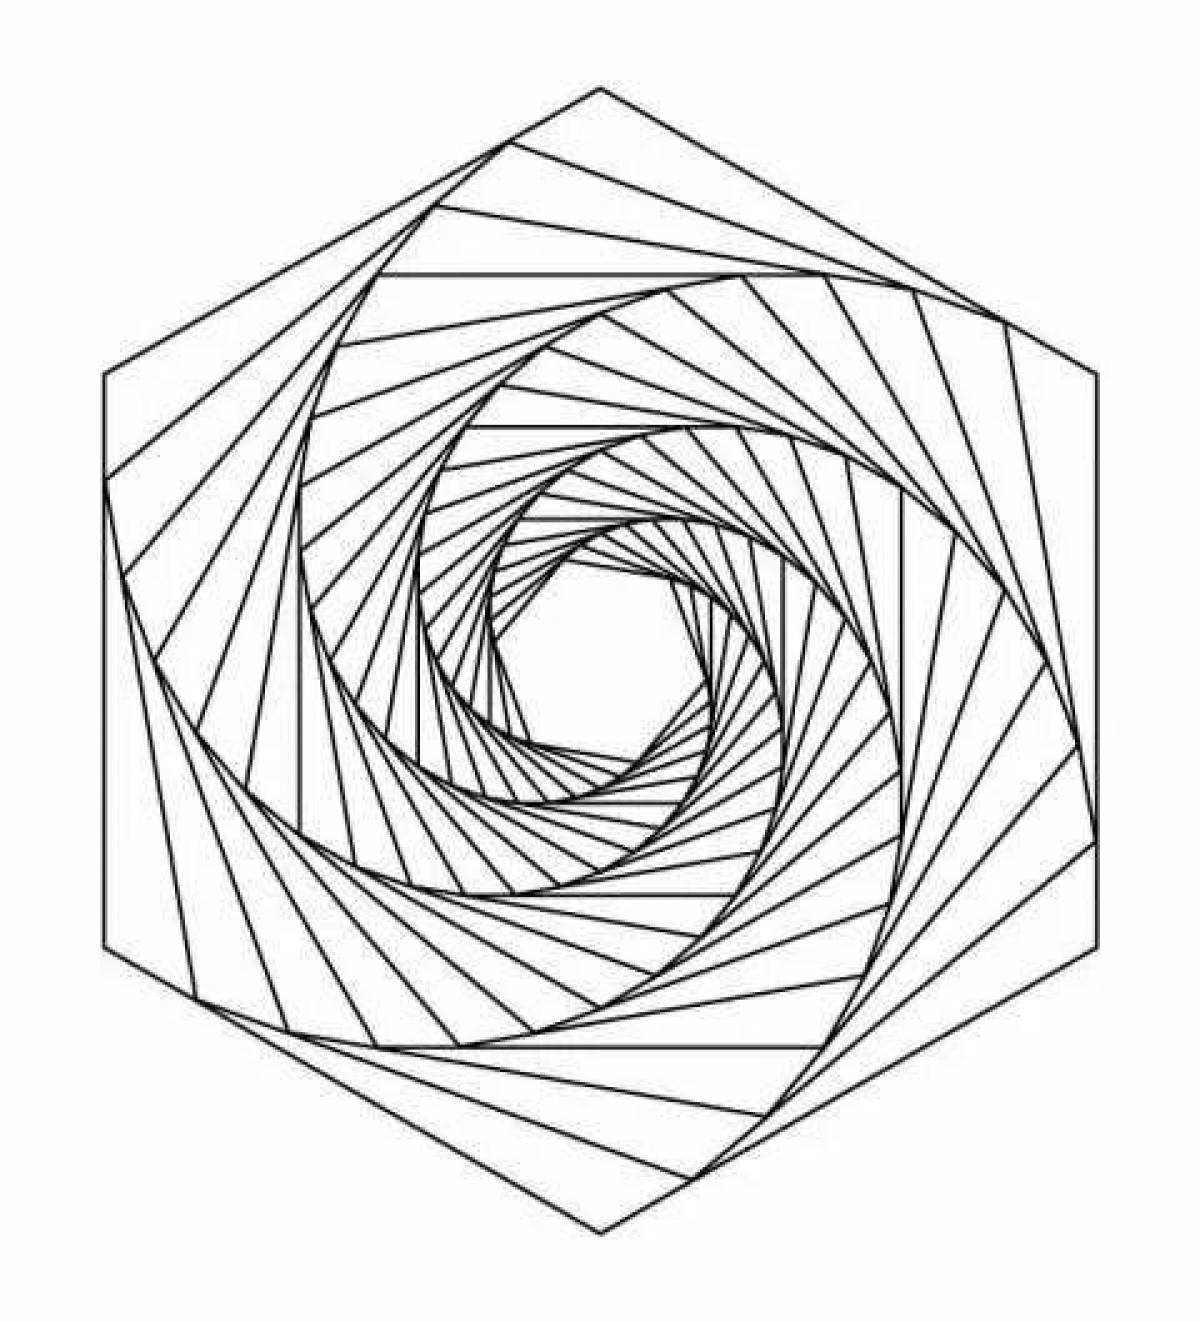 Innovative application spiral coloring page